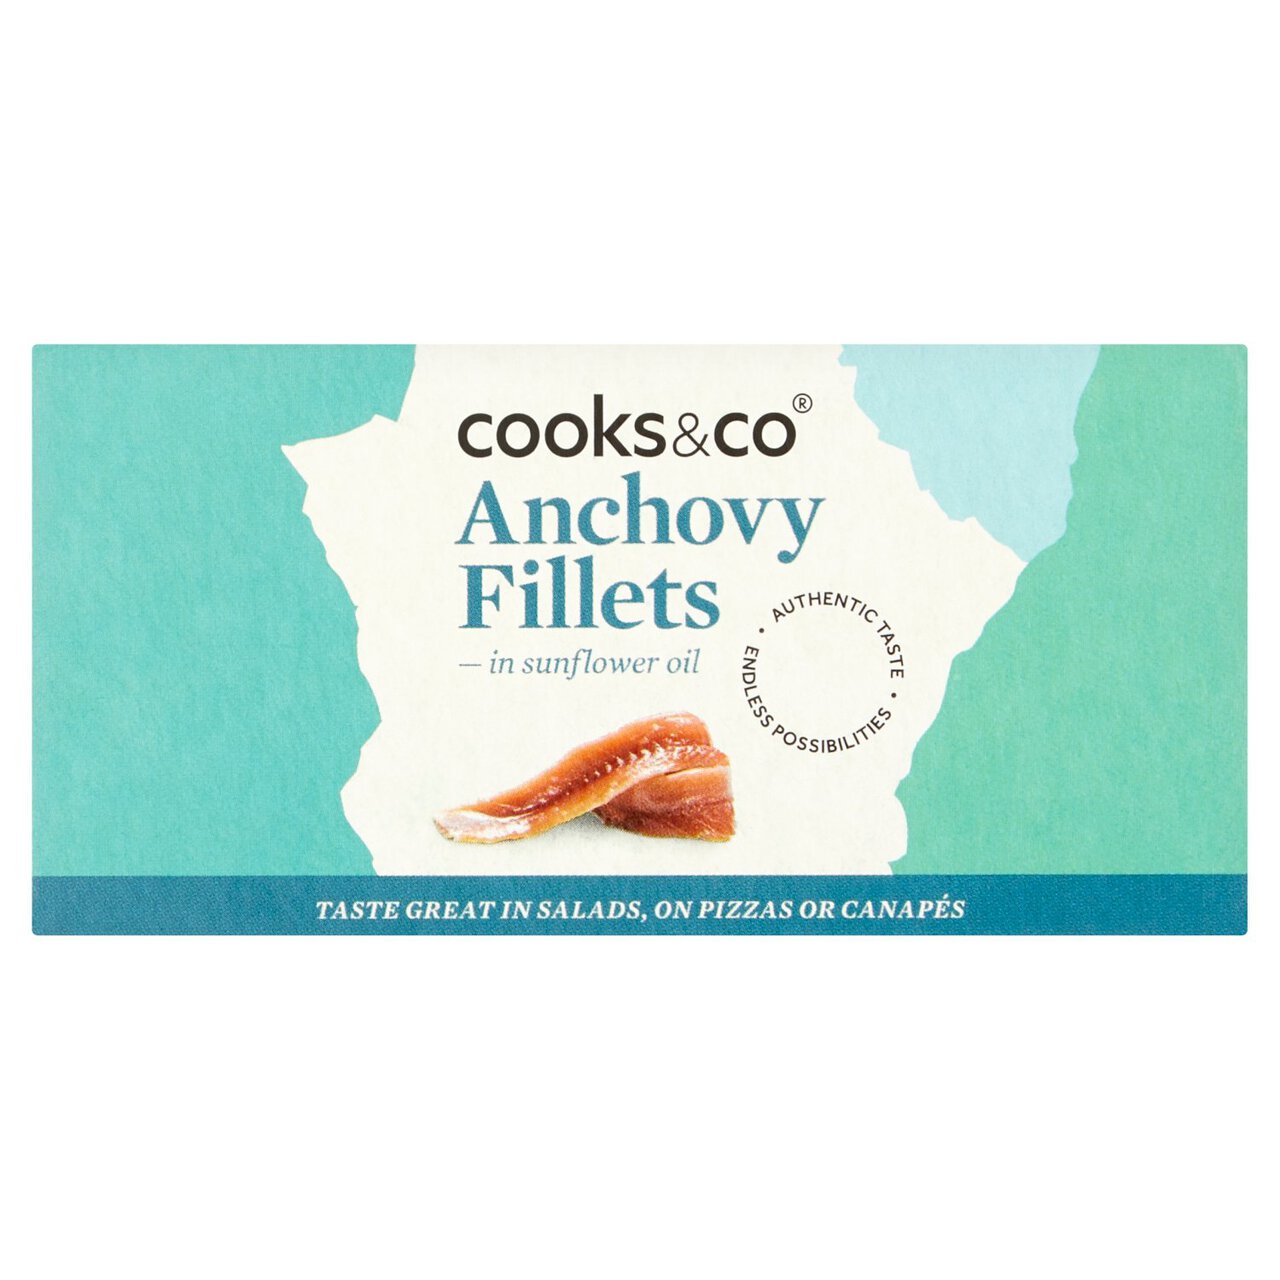 Cooks & Co Anchovy Fillets in Sunflower Oil 50g